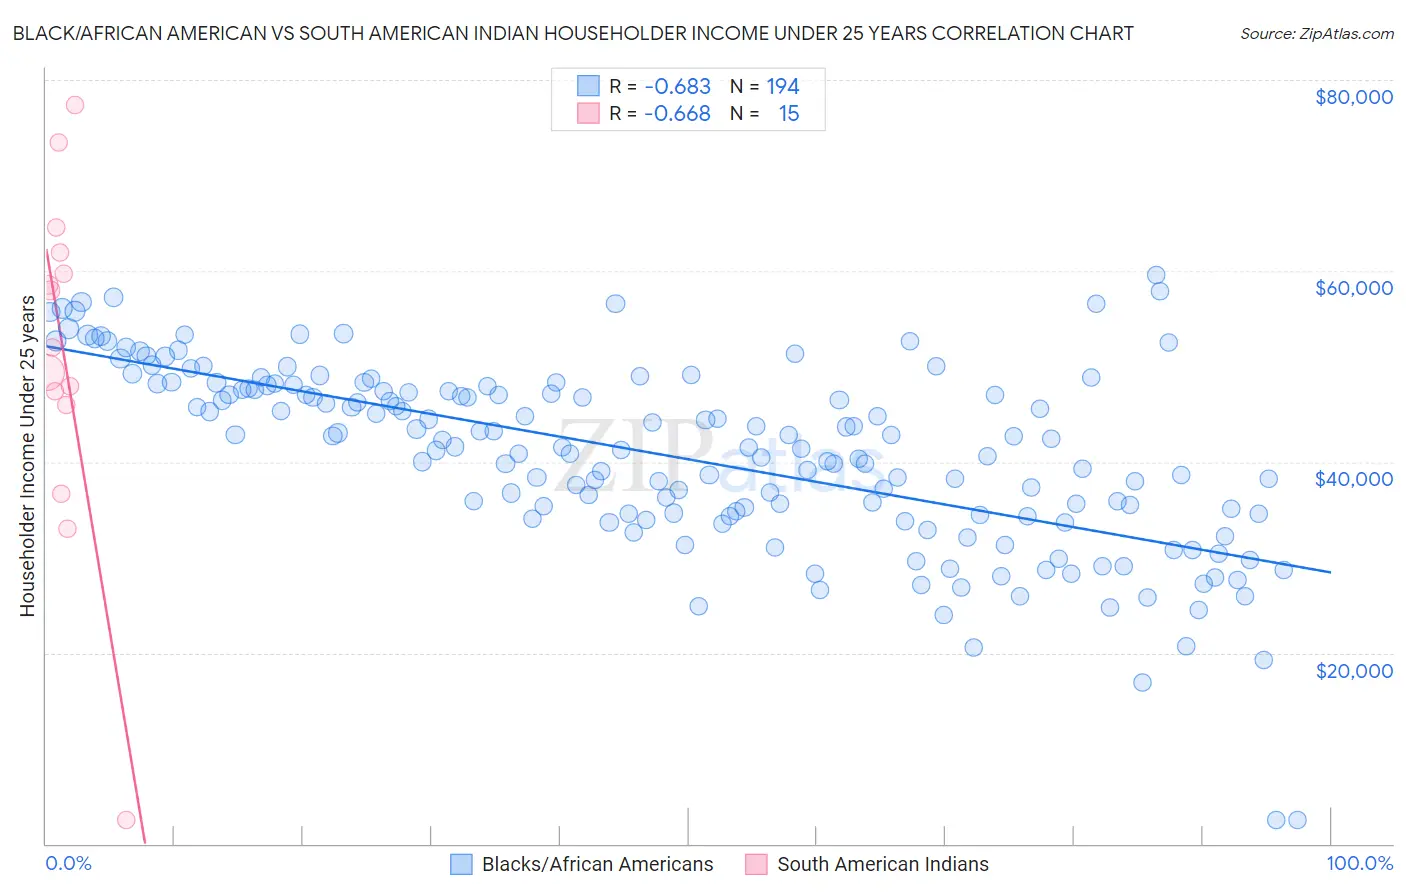 Black/African American vs South American Indian Householder Income Under 25 years